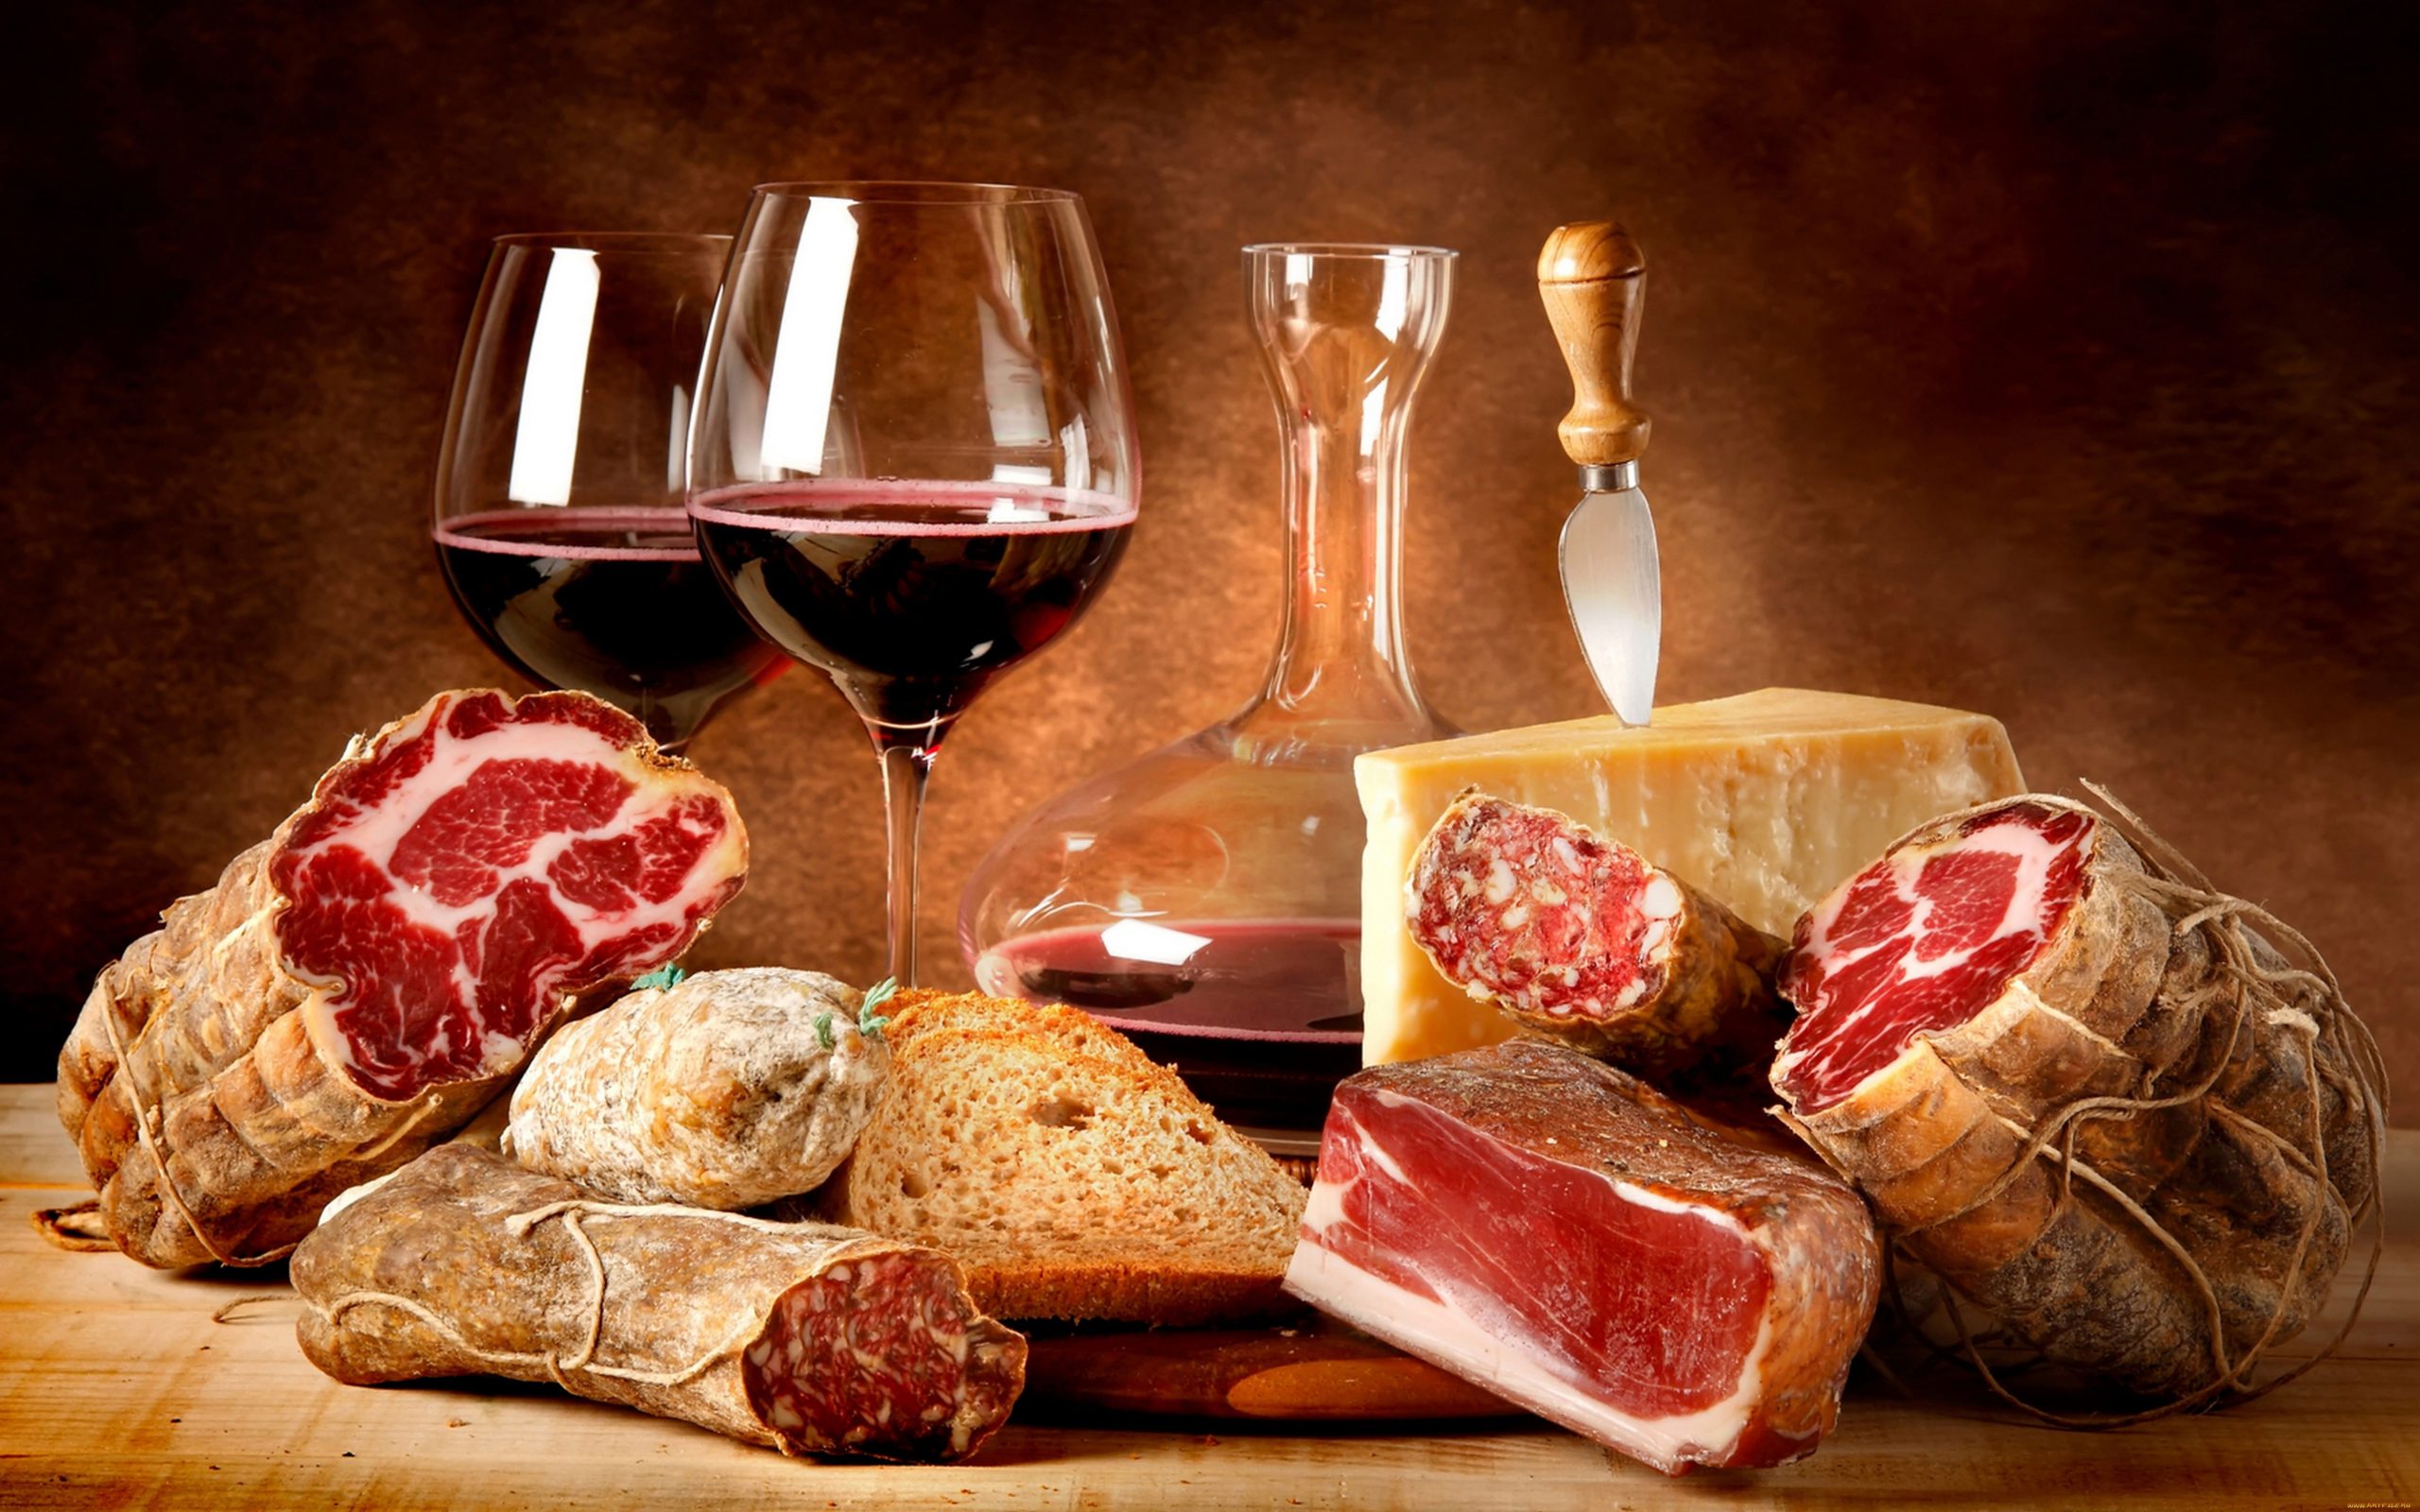 Raw meats and wine glasses wallpaper, cheese, food, food and drink, red wine